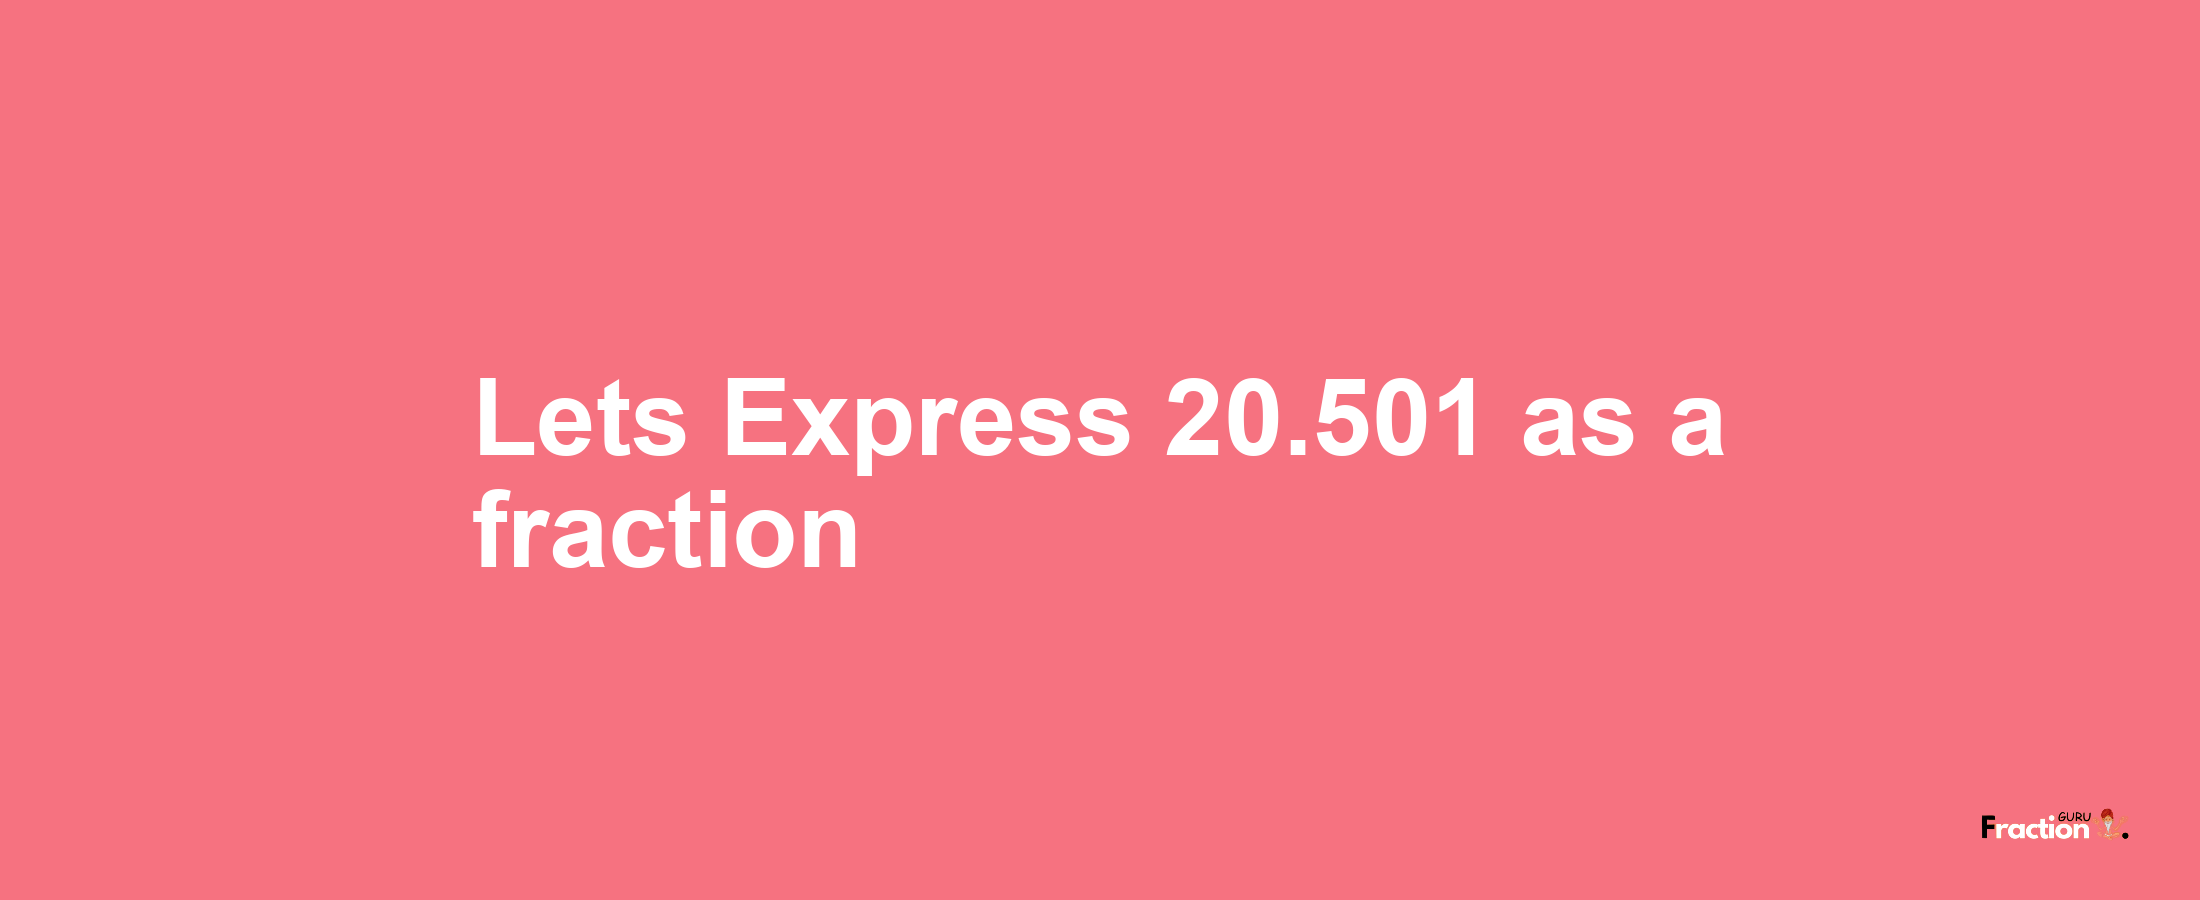 Lets Express 20.501 as afraction